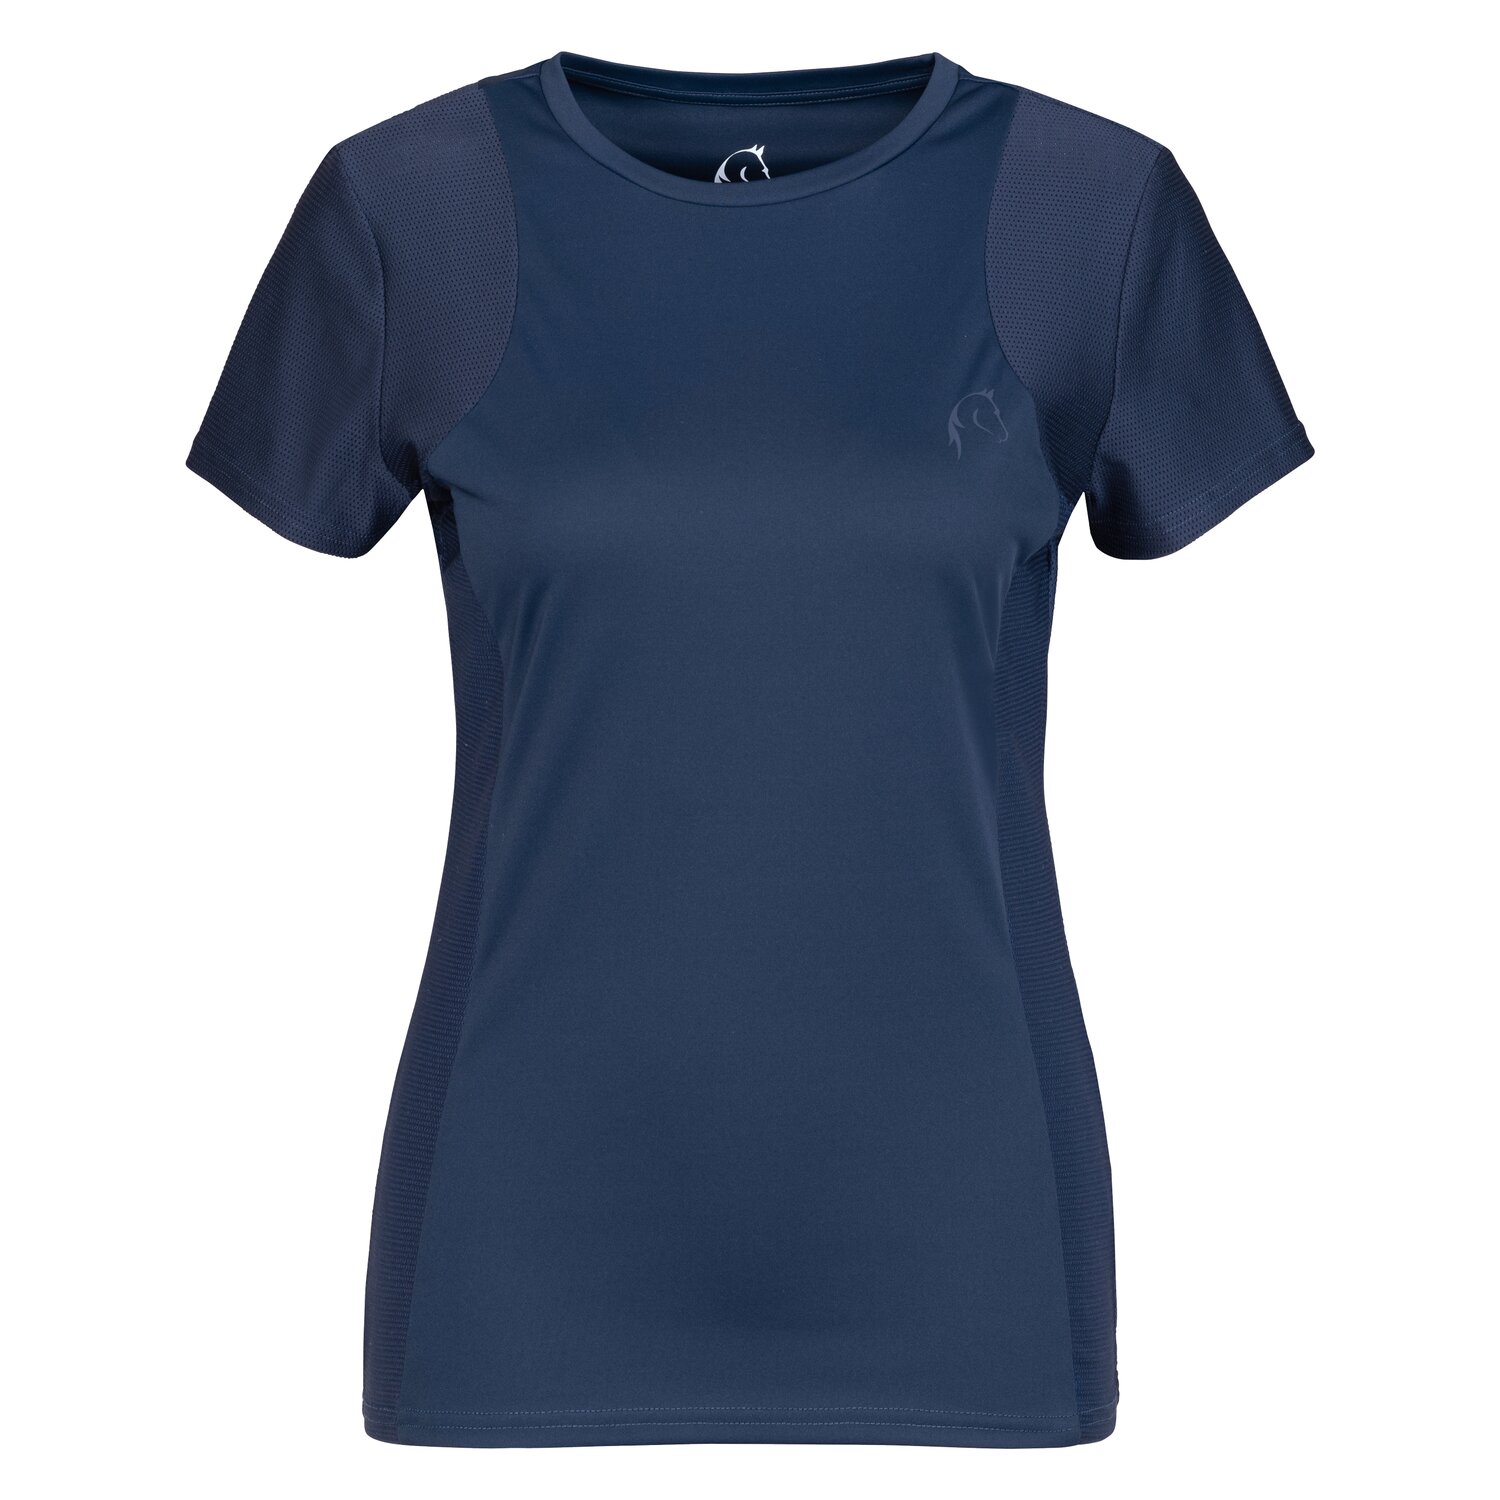 Cheval de Luxe Funktions-T-Shirt navy | L